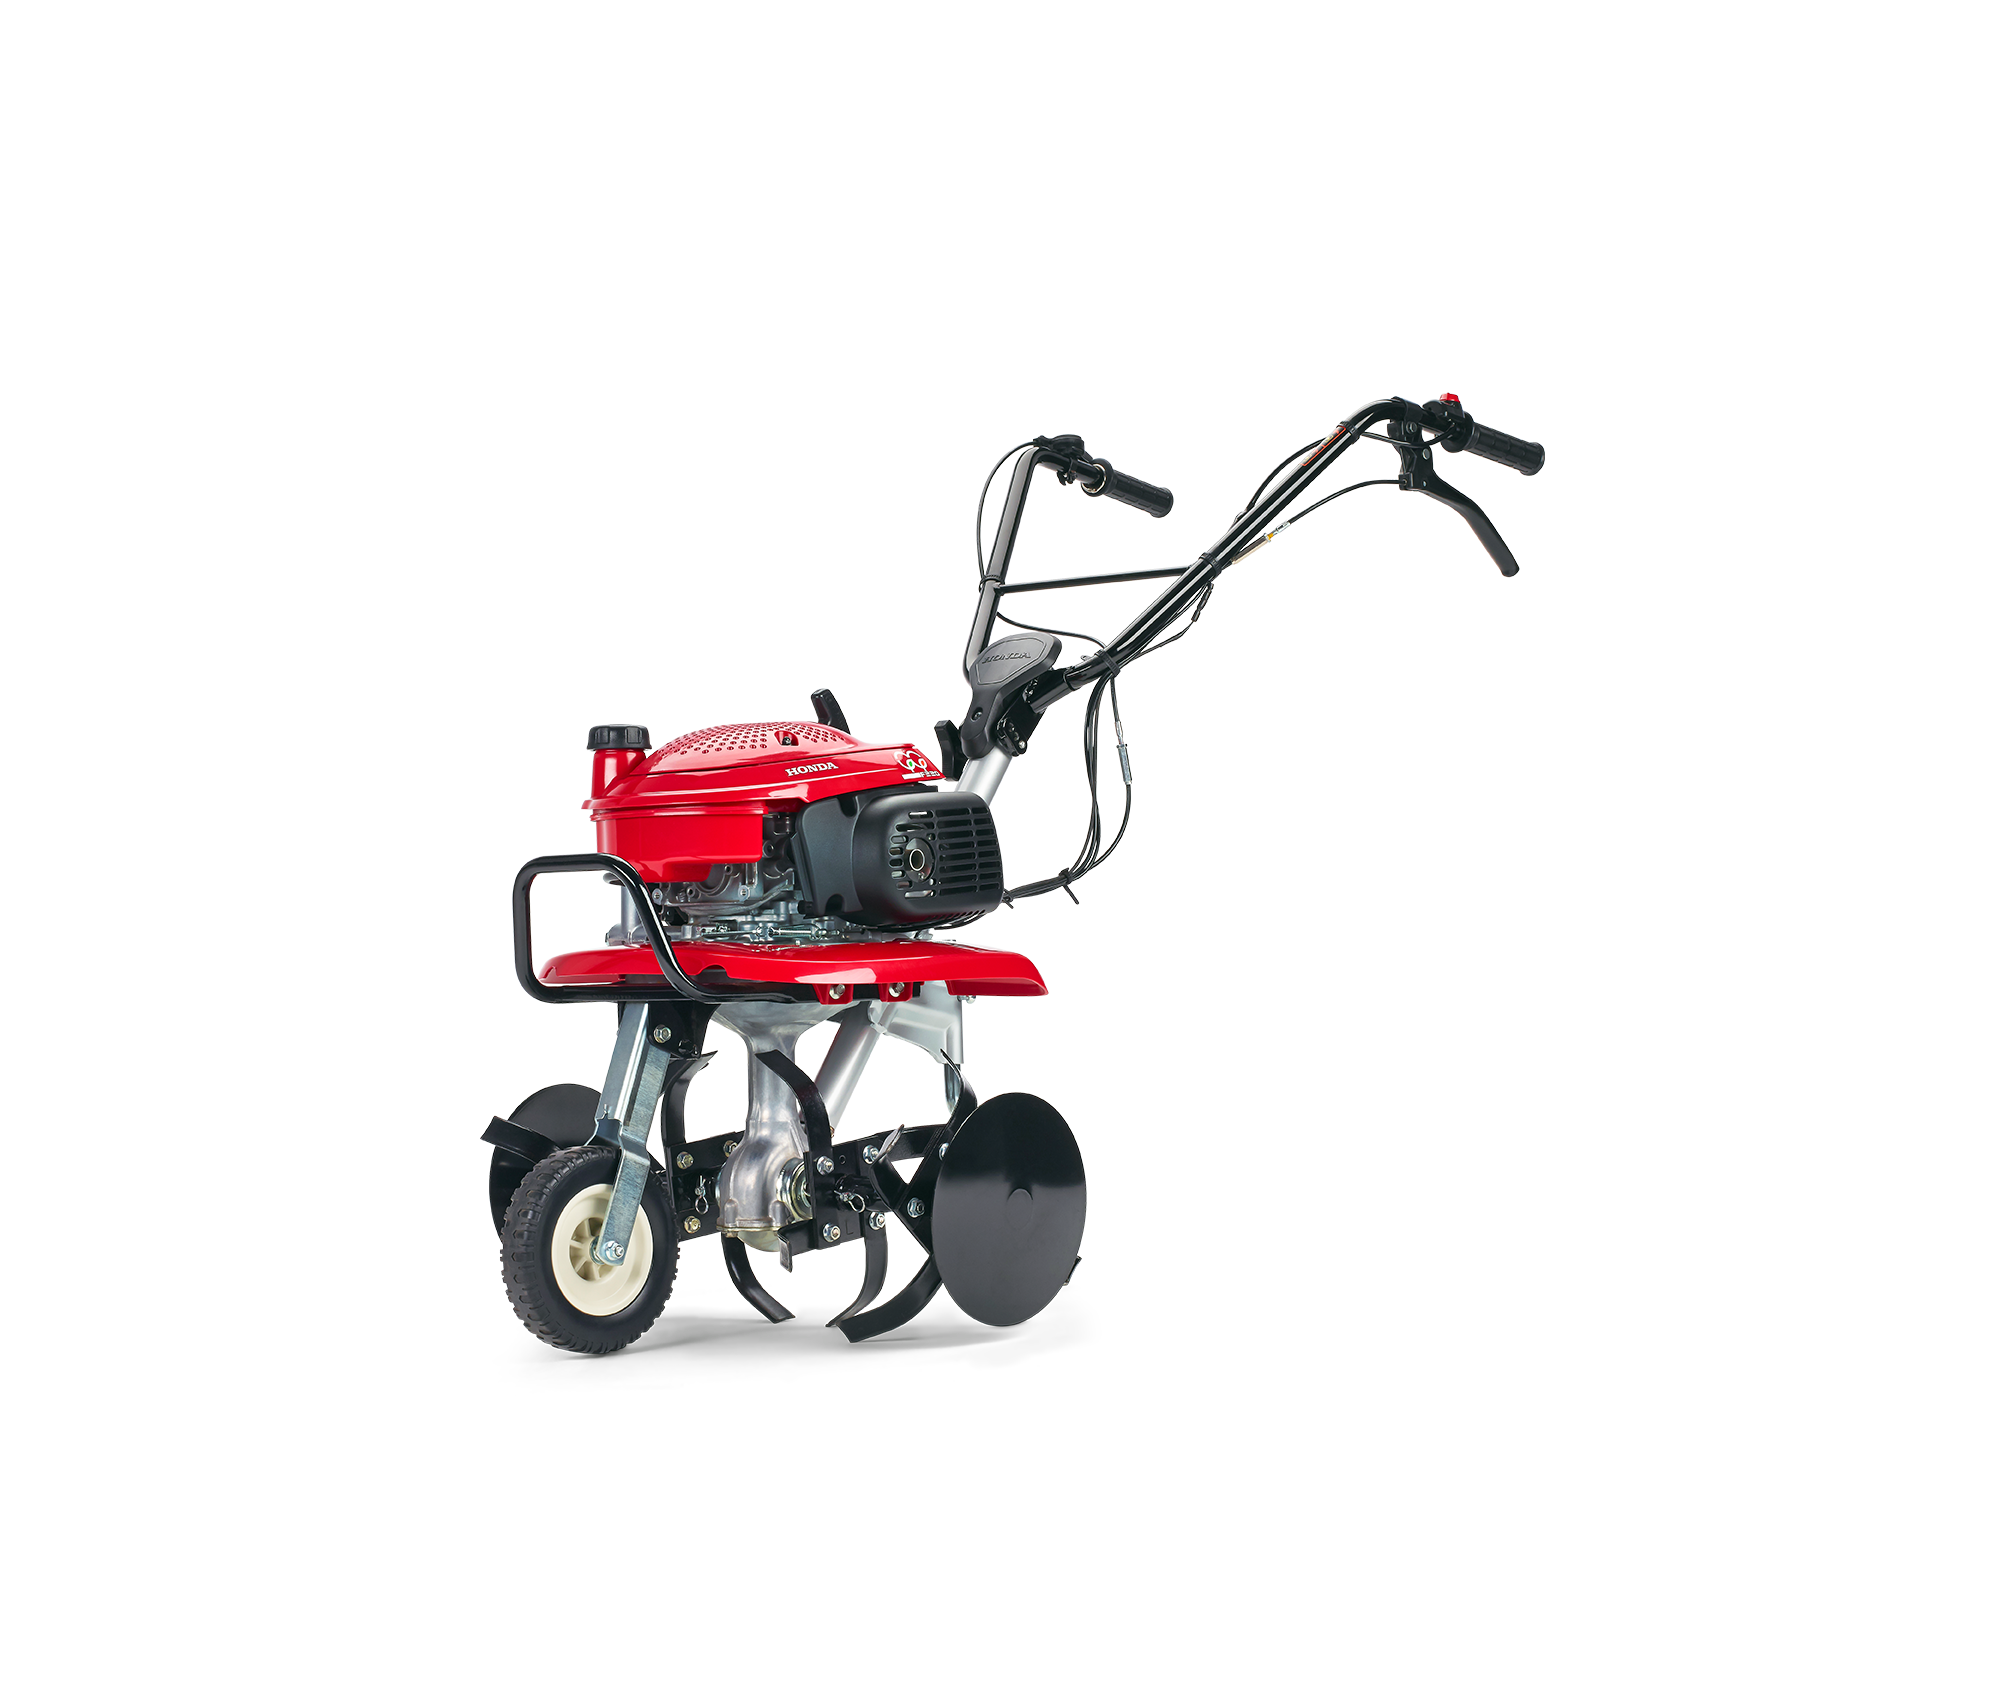 Image of the Mid-Tine 21" tiller